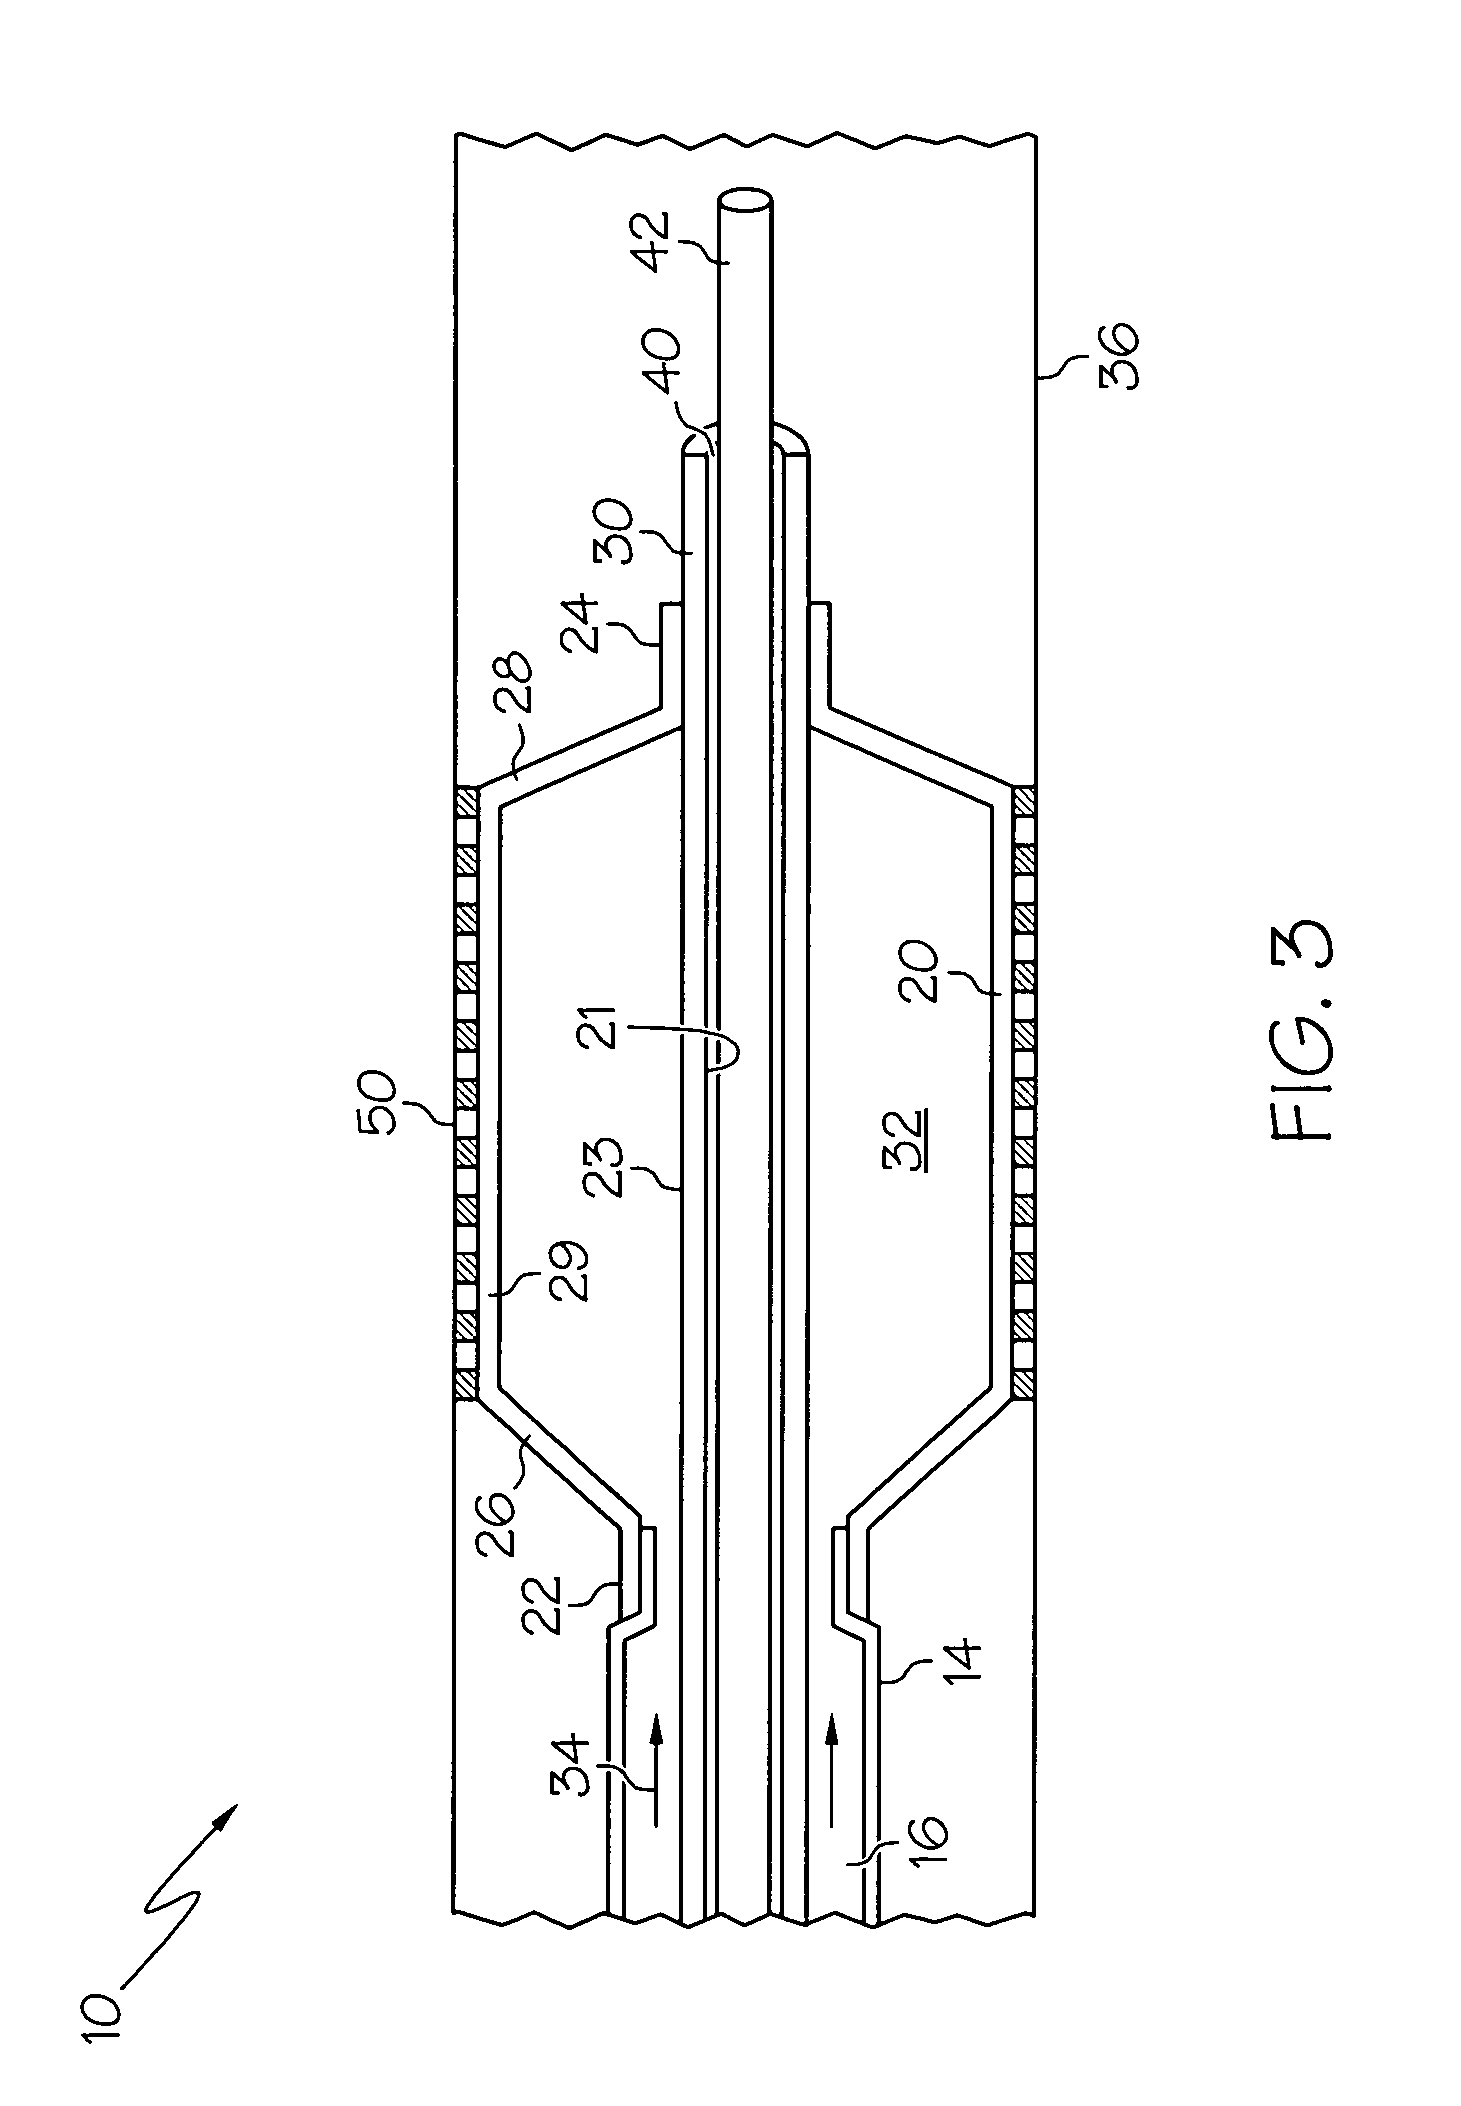 Balloon catheter with expandable wire lumen